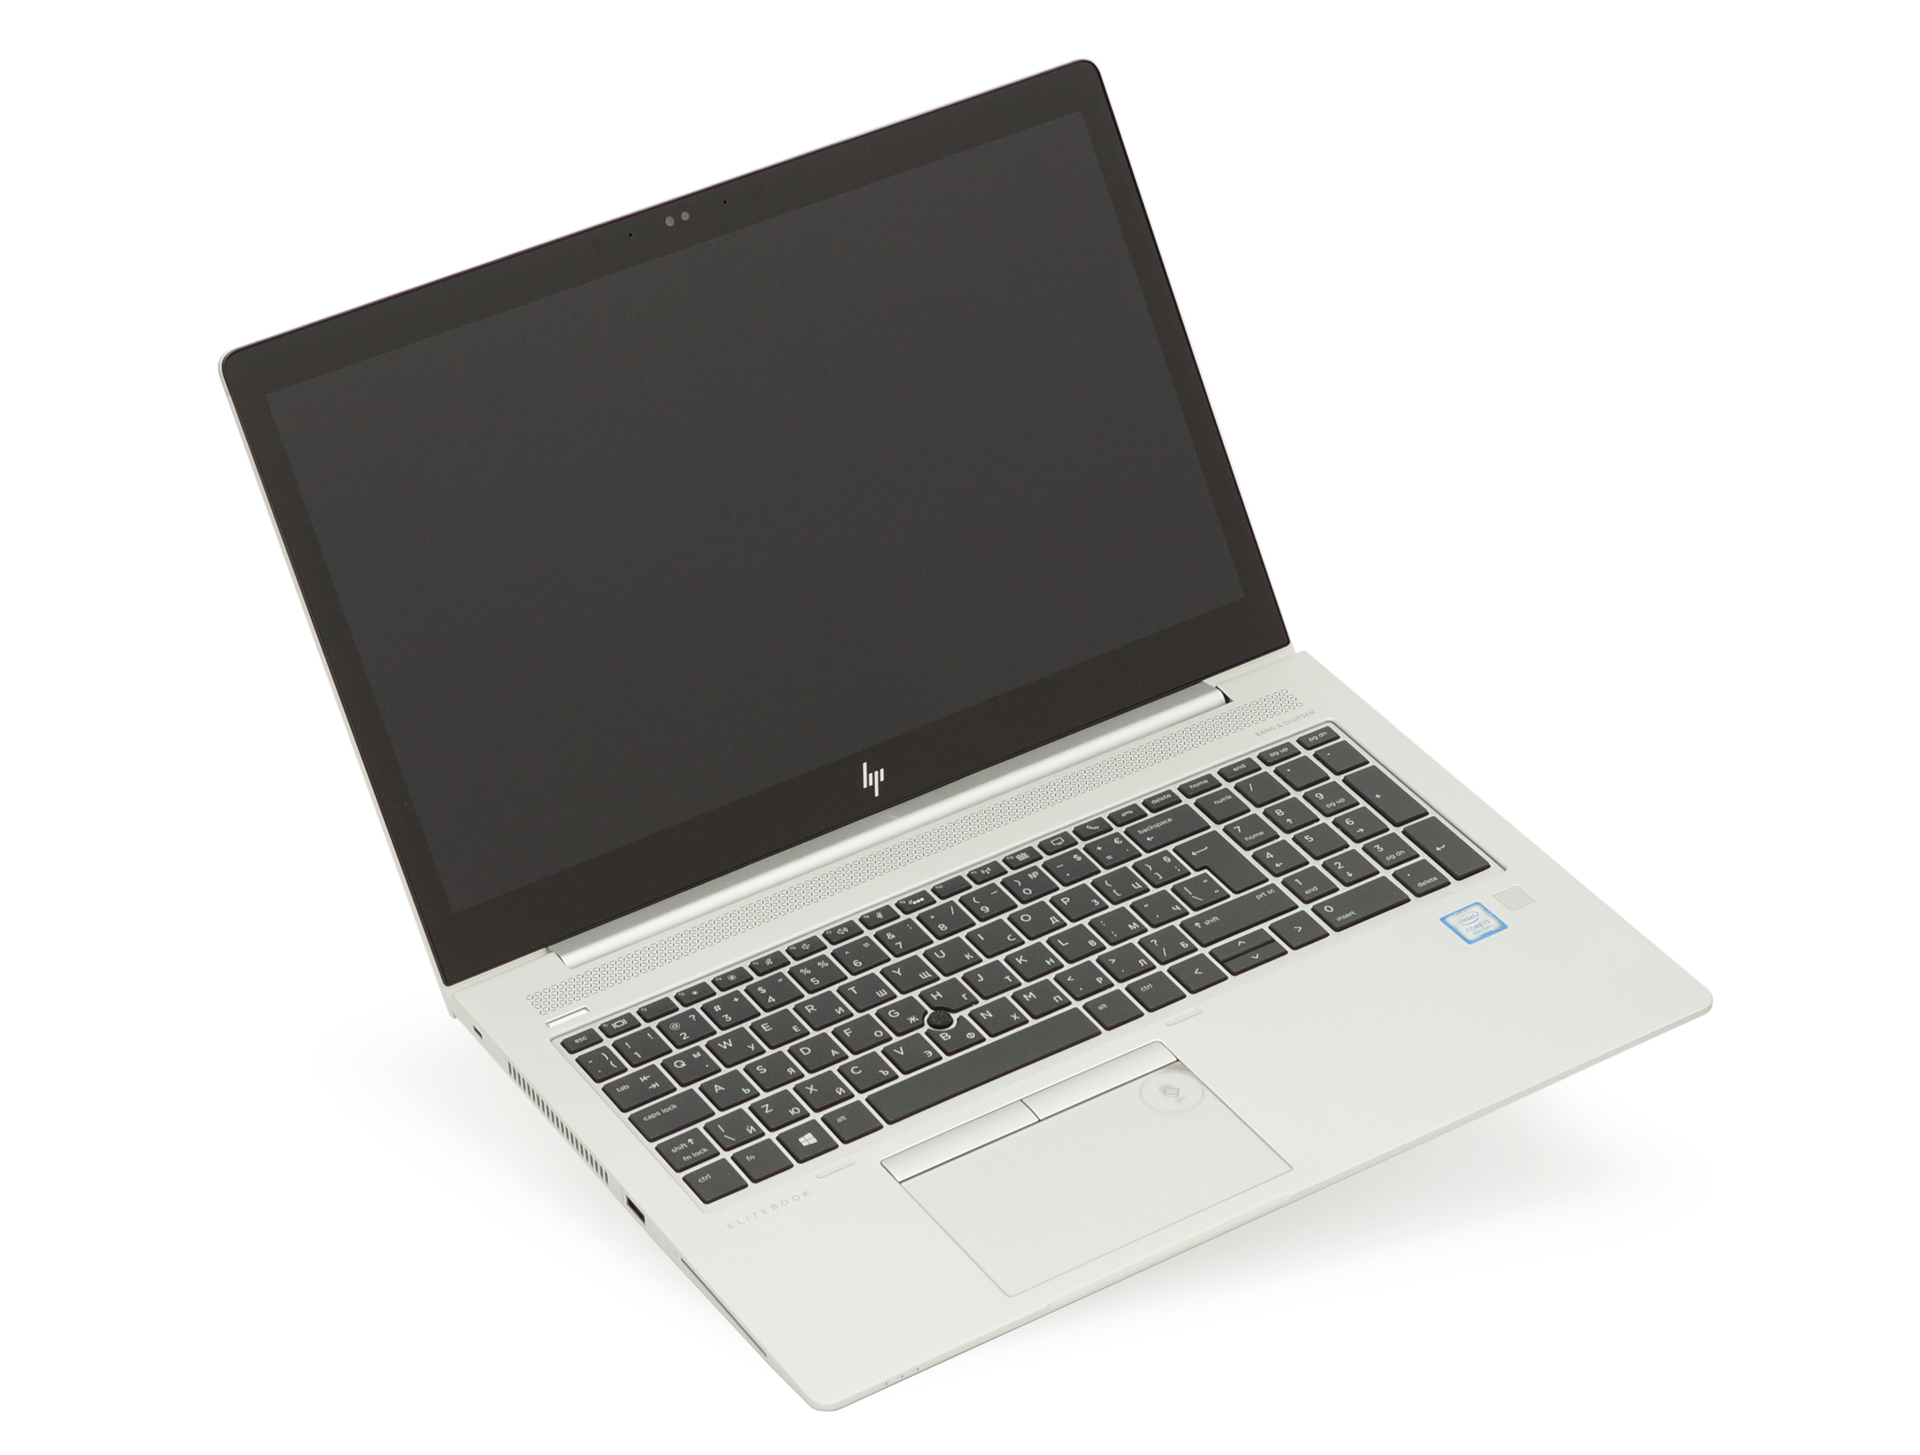 HP EliteBook 830 G7 impresses in almost every aspect except one -   News